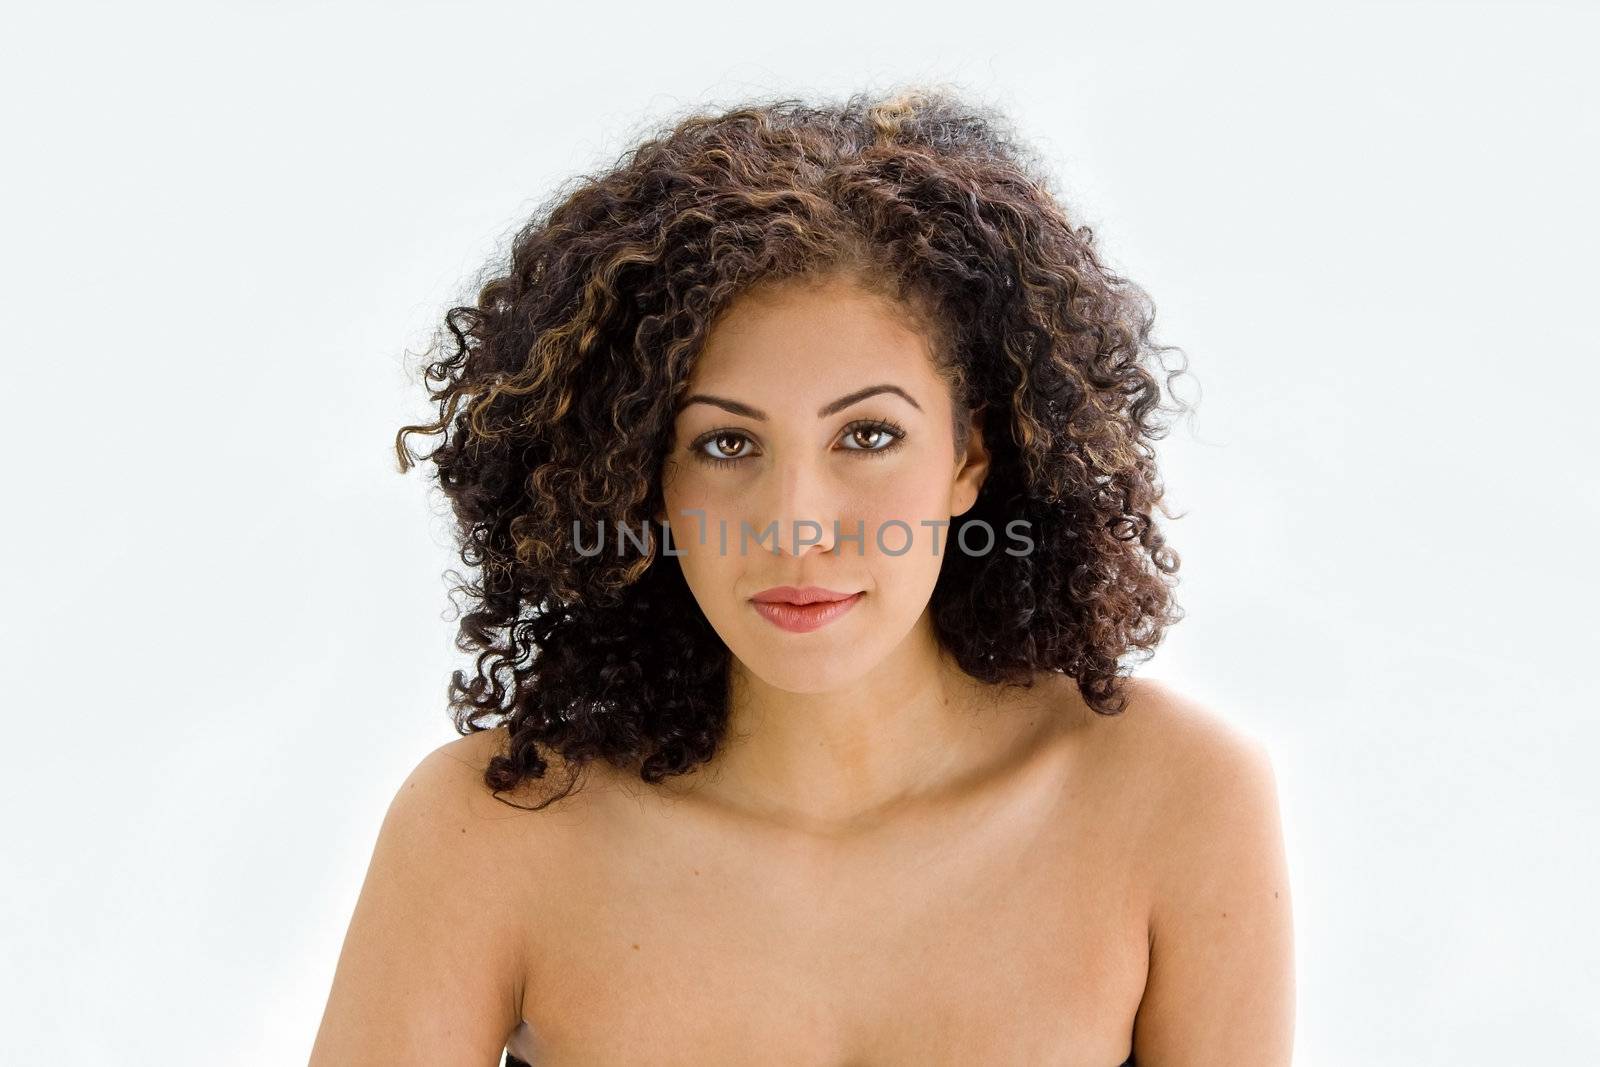 Sincere beautiful young woman with brown curly wild hair and bare shoulders, isolated